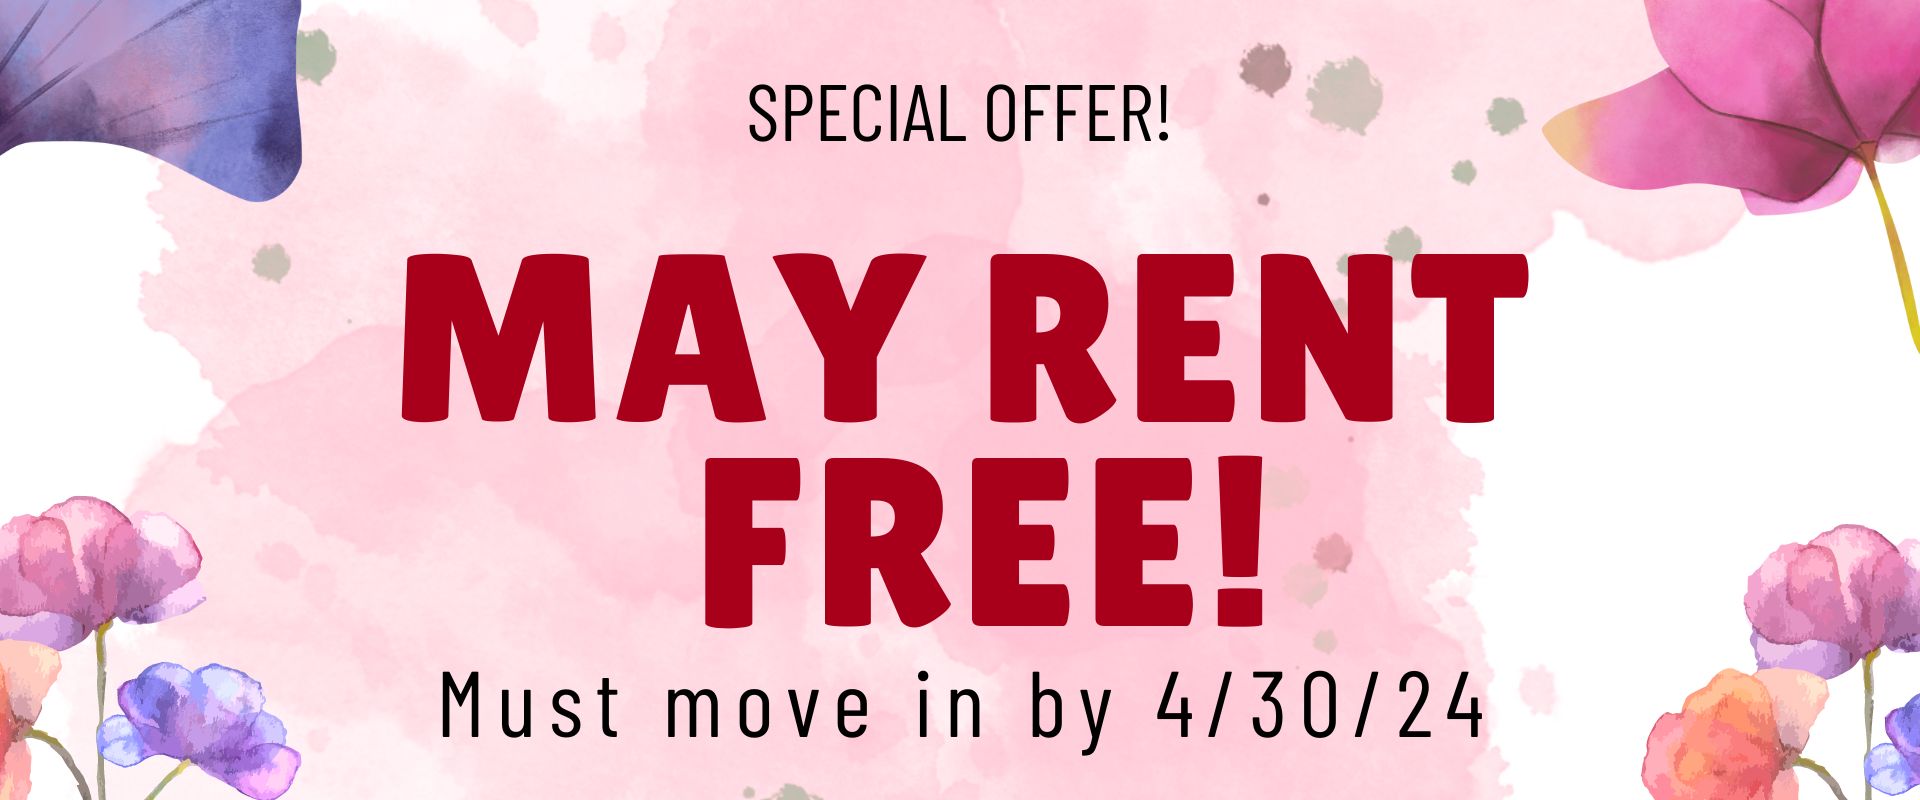 May Rent Free! Must move in by 4/30/24